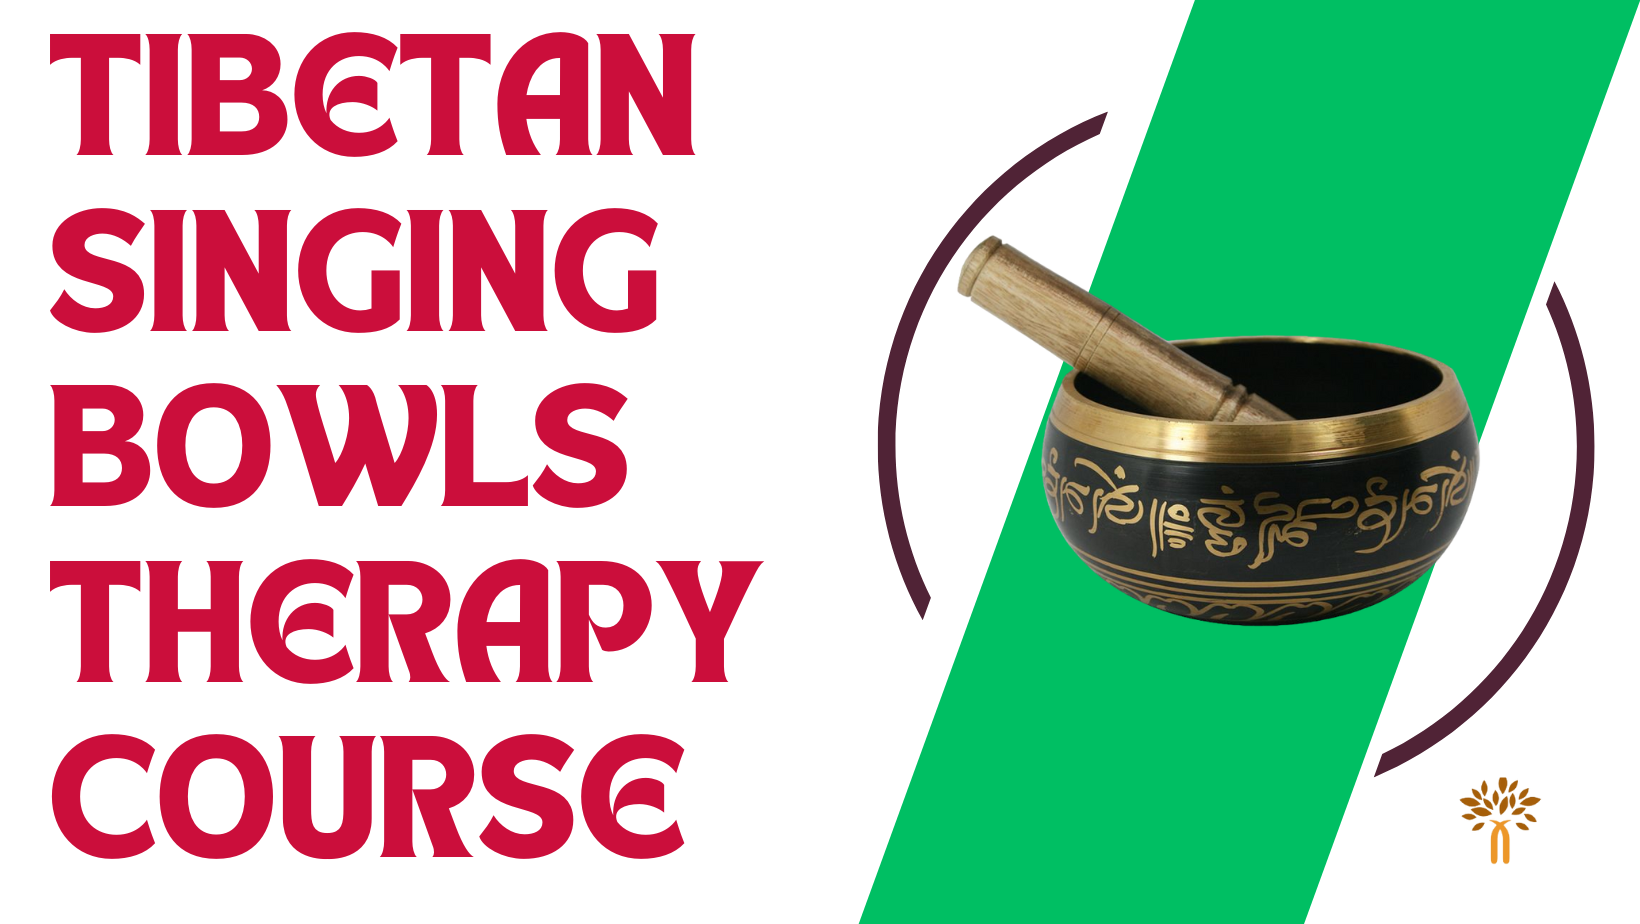 Tibetan Singing Bowls Therapy Courses in Yavatmal